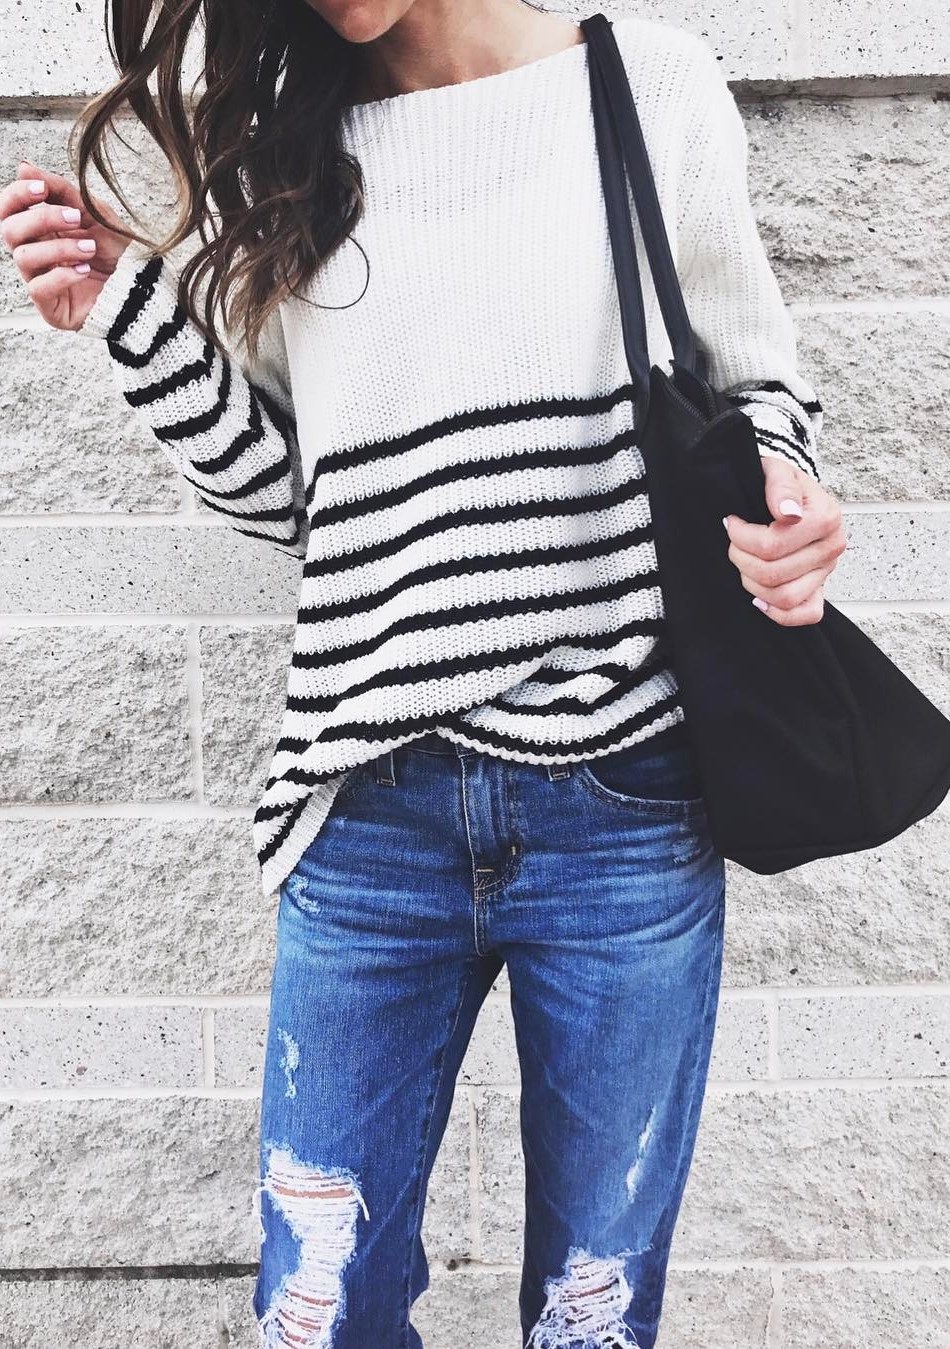 winter trends / stripped sweater + ripped jeans + bag